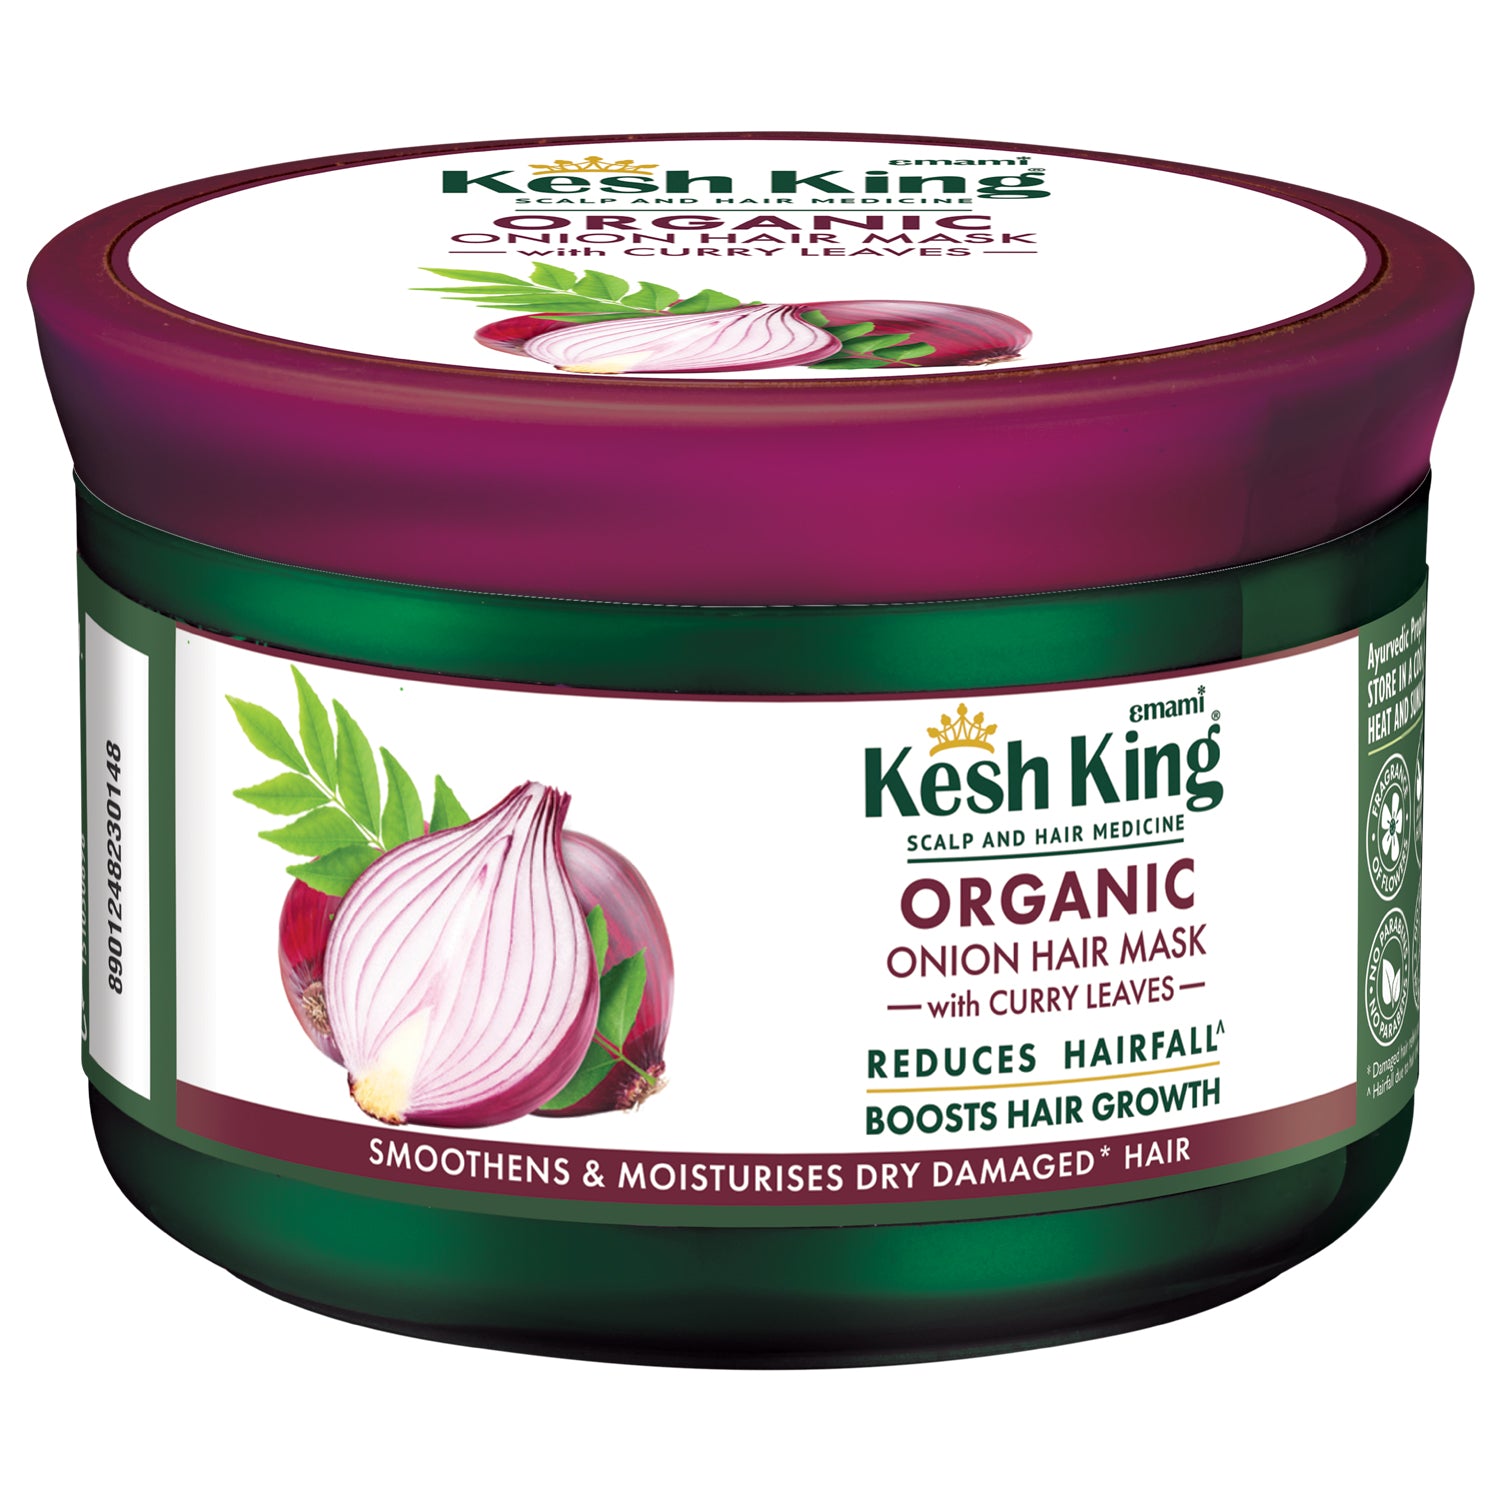 Kesh King Organic Onion Hair Mask With Curry Leaves - 200ml